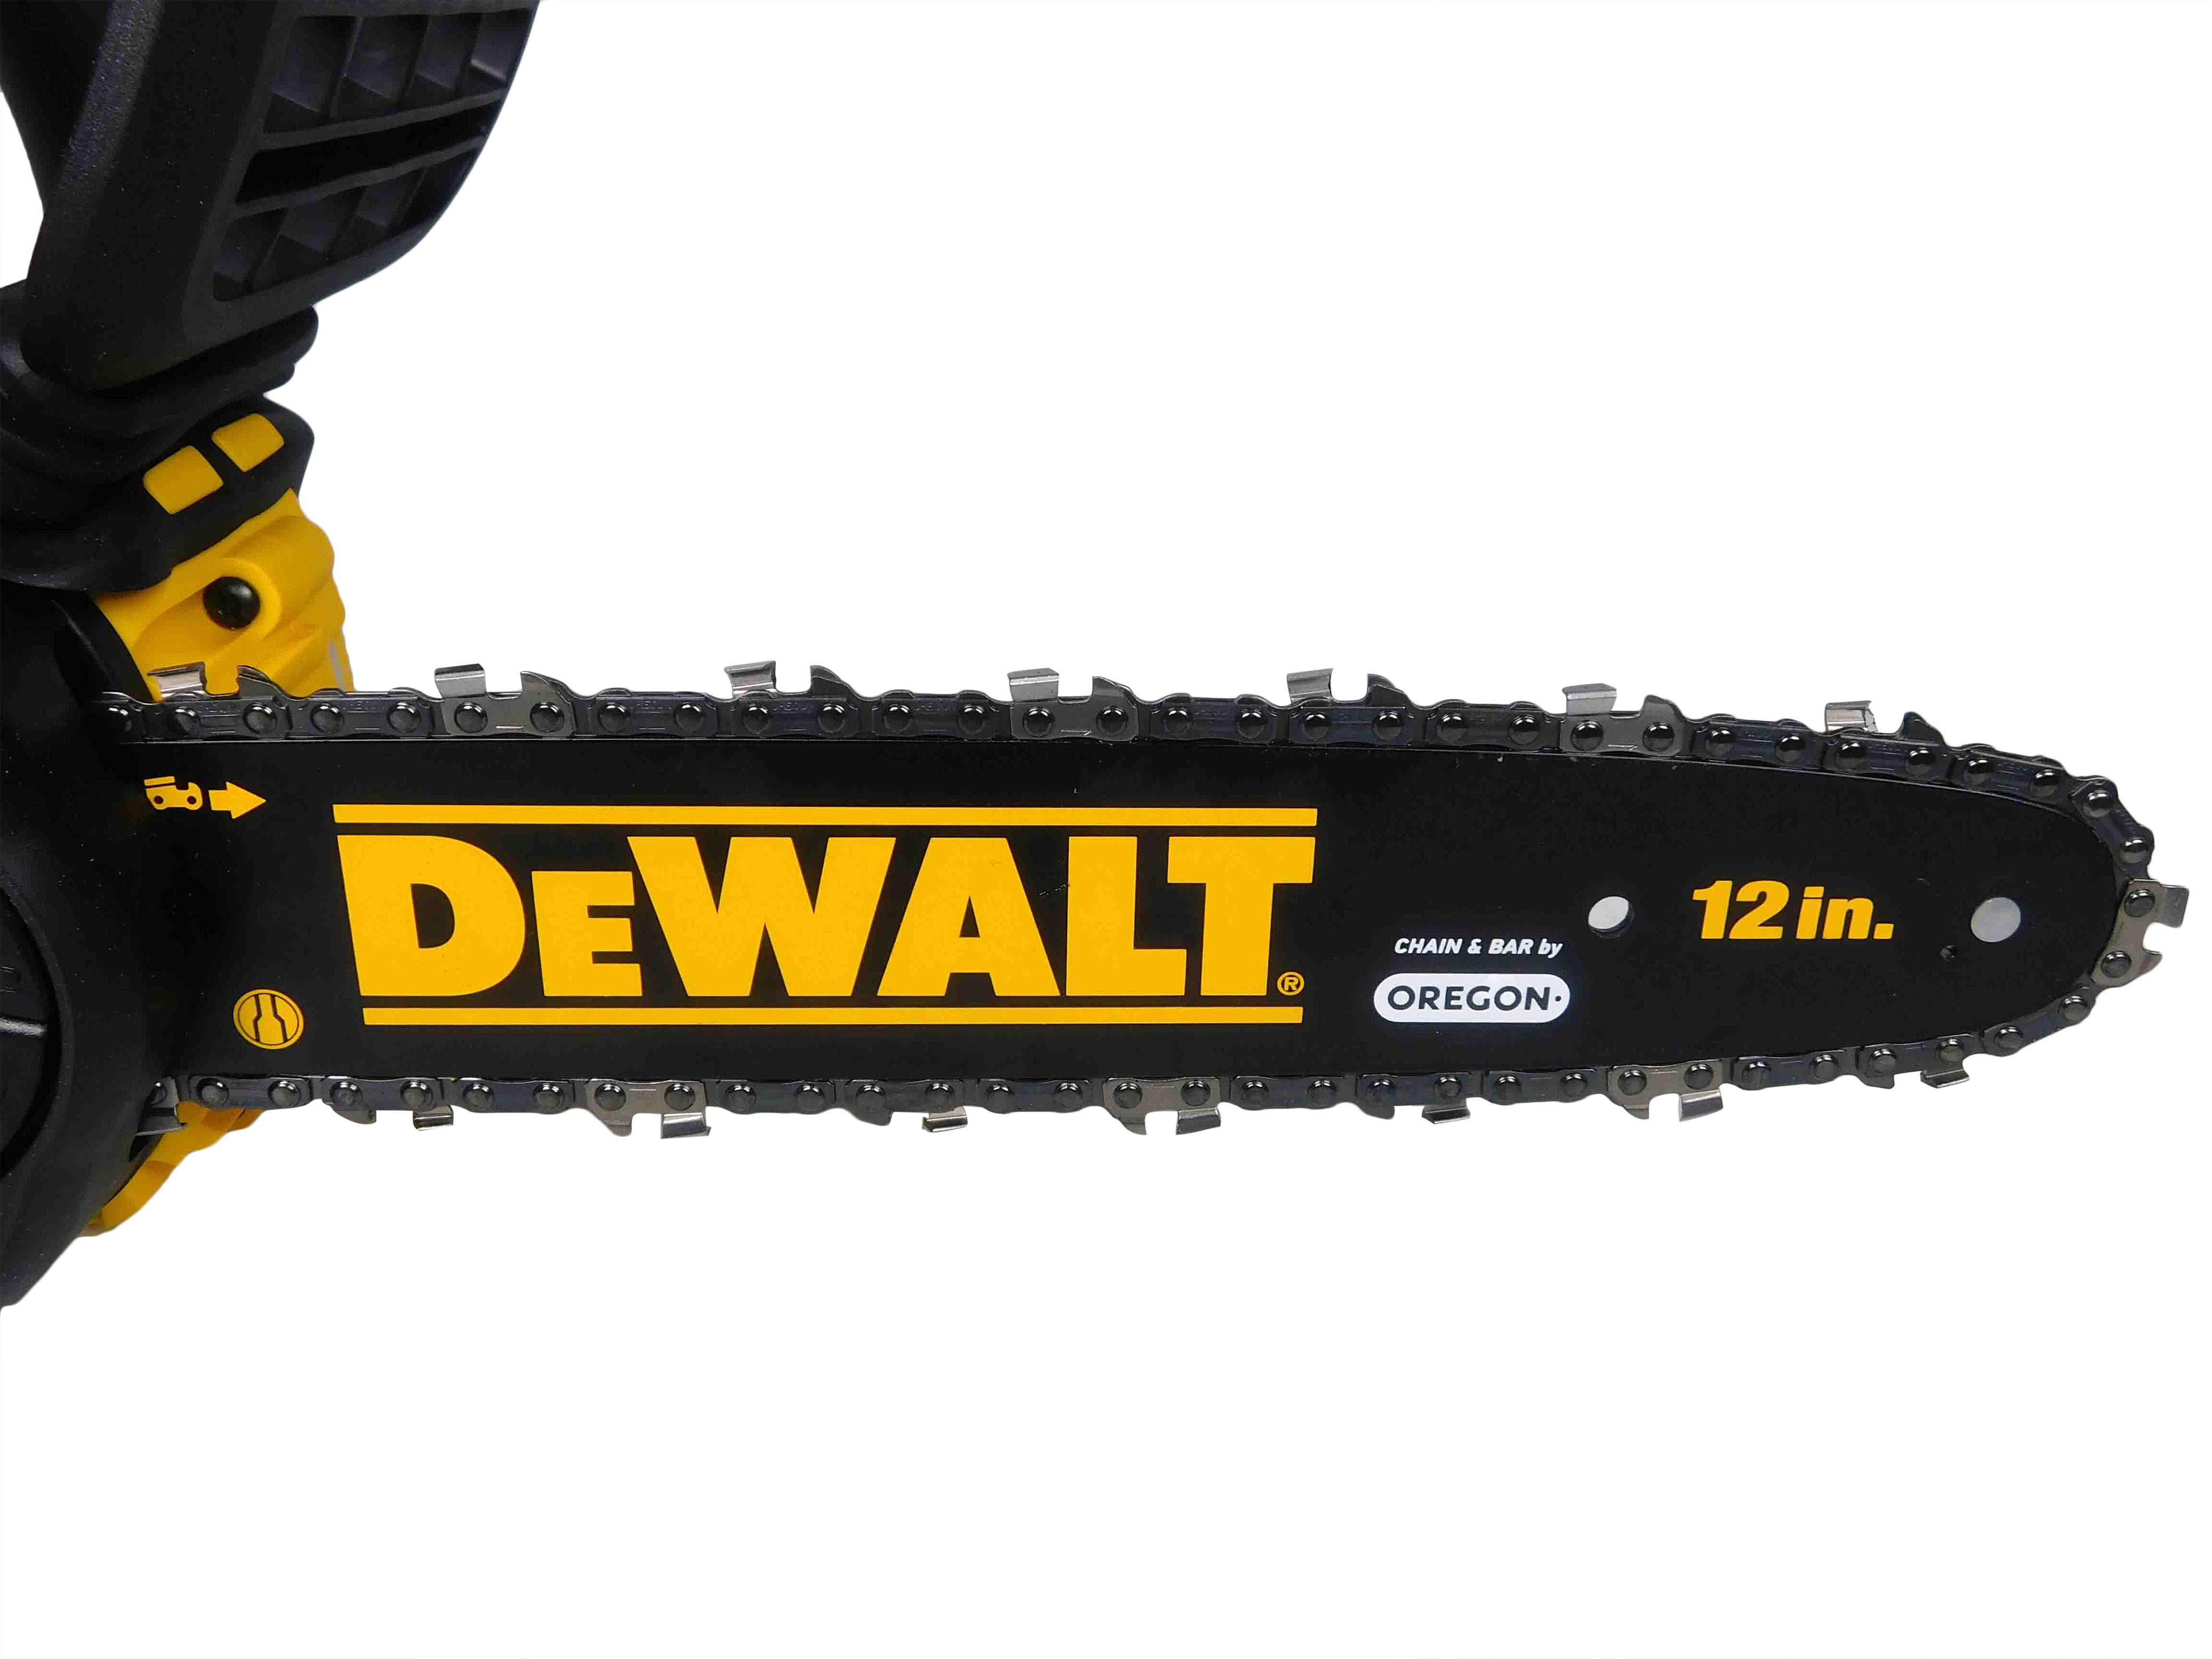 DEWALT DCCS620B 20V Max Compact Cordless Chainsaw Bare Tool w Brushless Motor